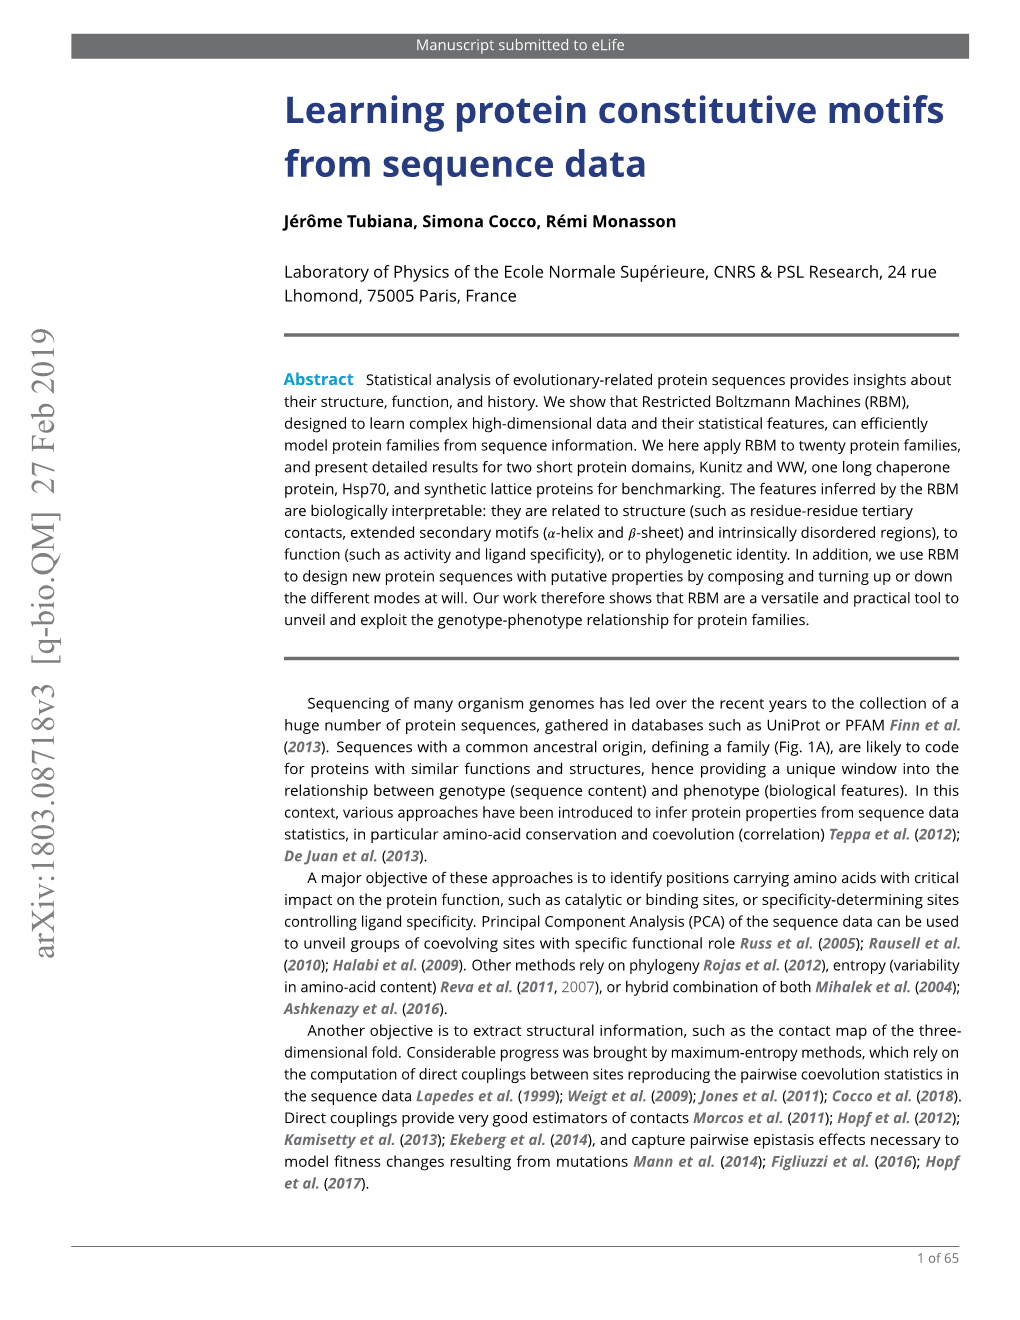 Learning Protein Constitutive Motifs from Sequence Data